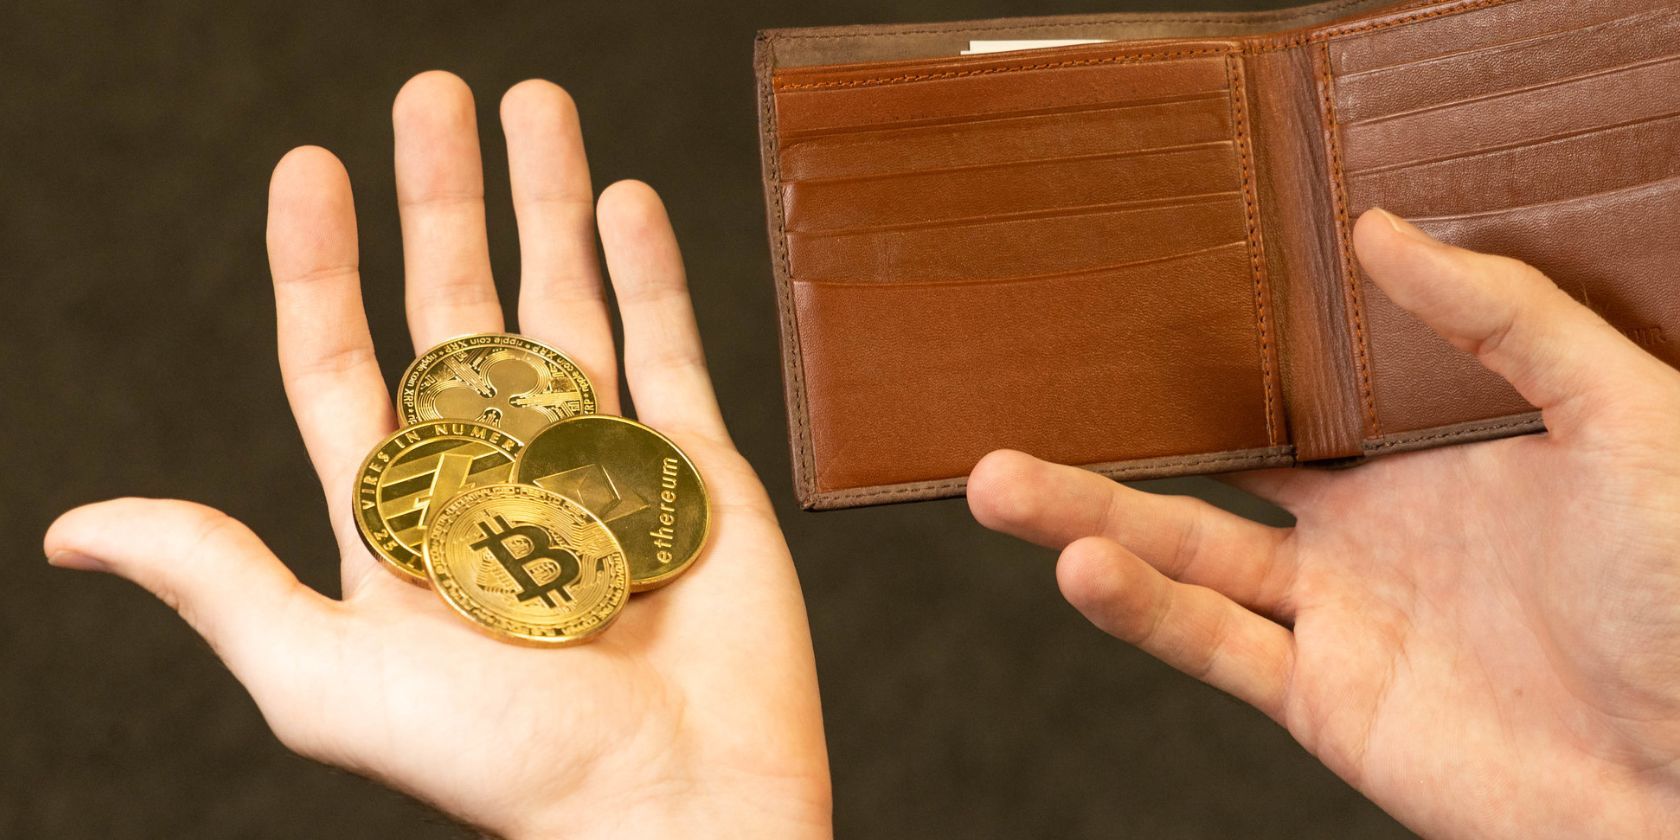 Person Holding Crypto Coins In One Hand And Leather Wallet In The Other